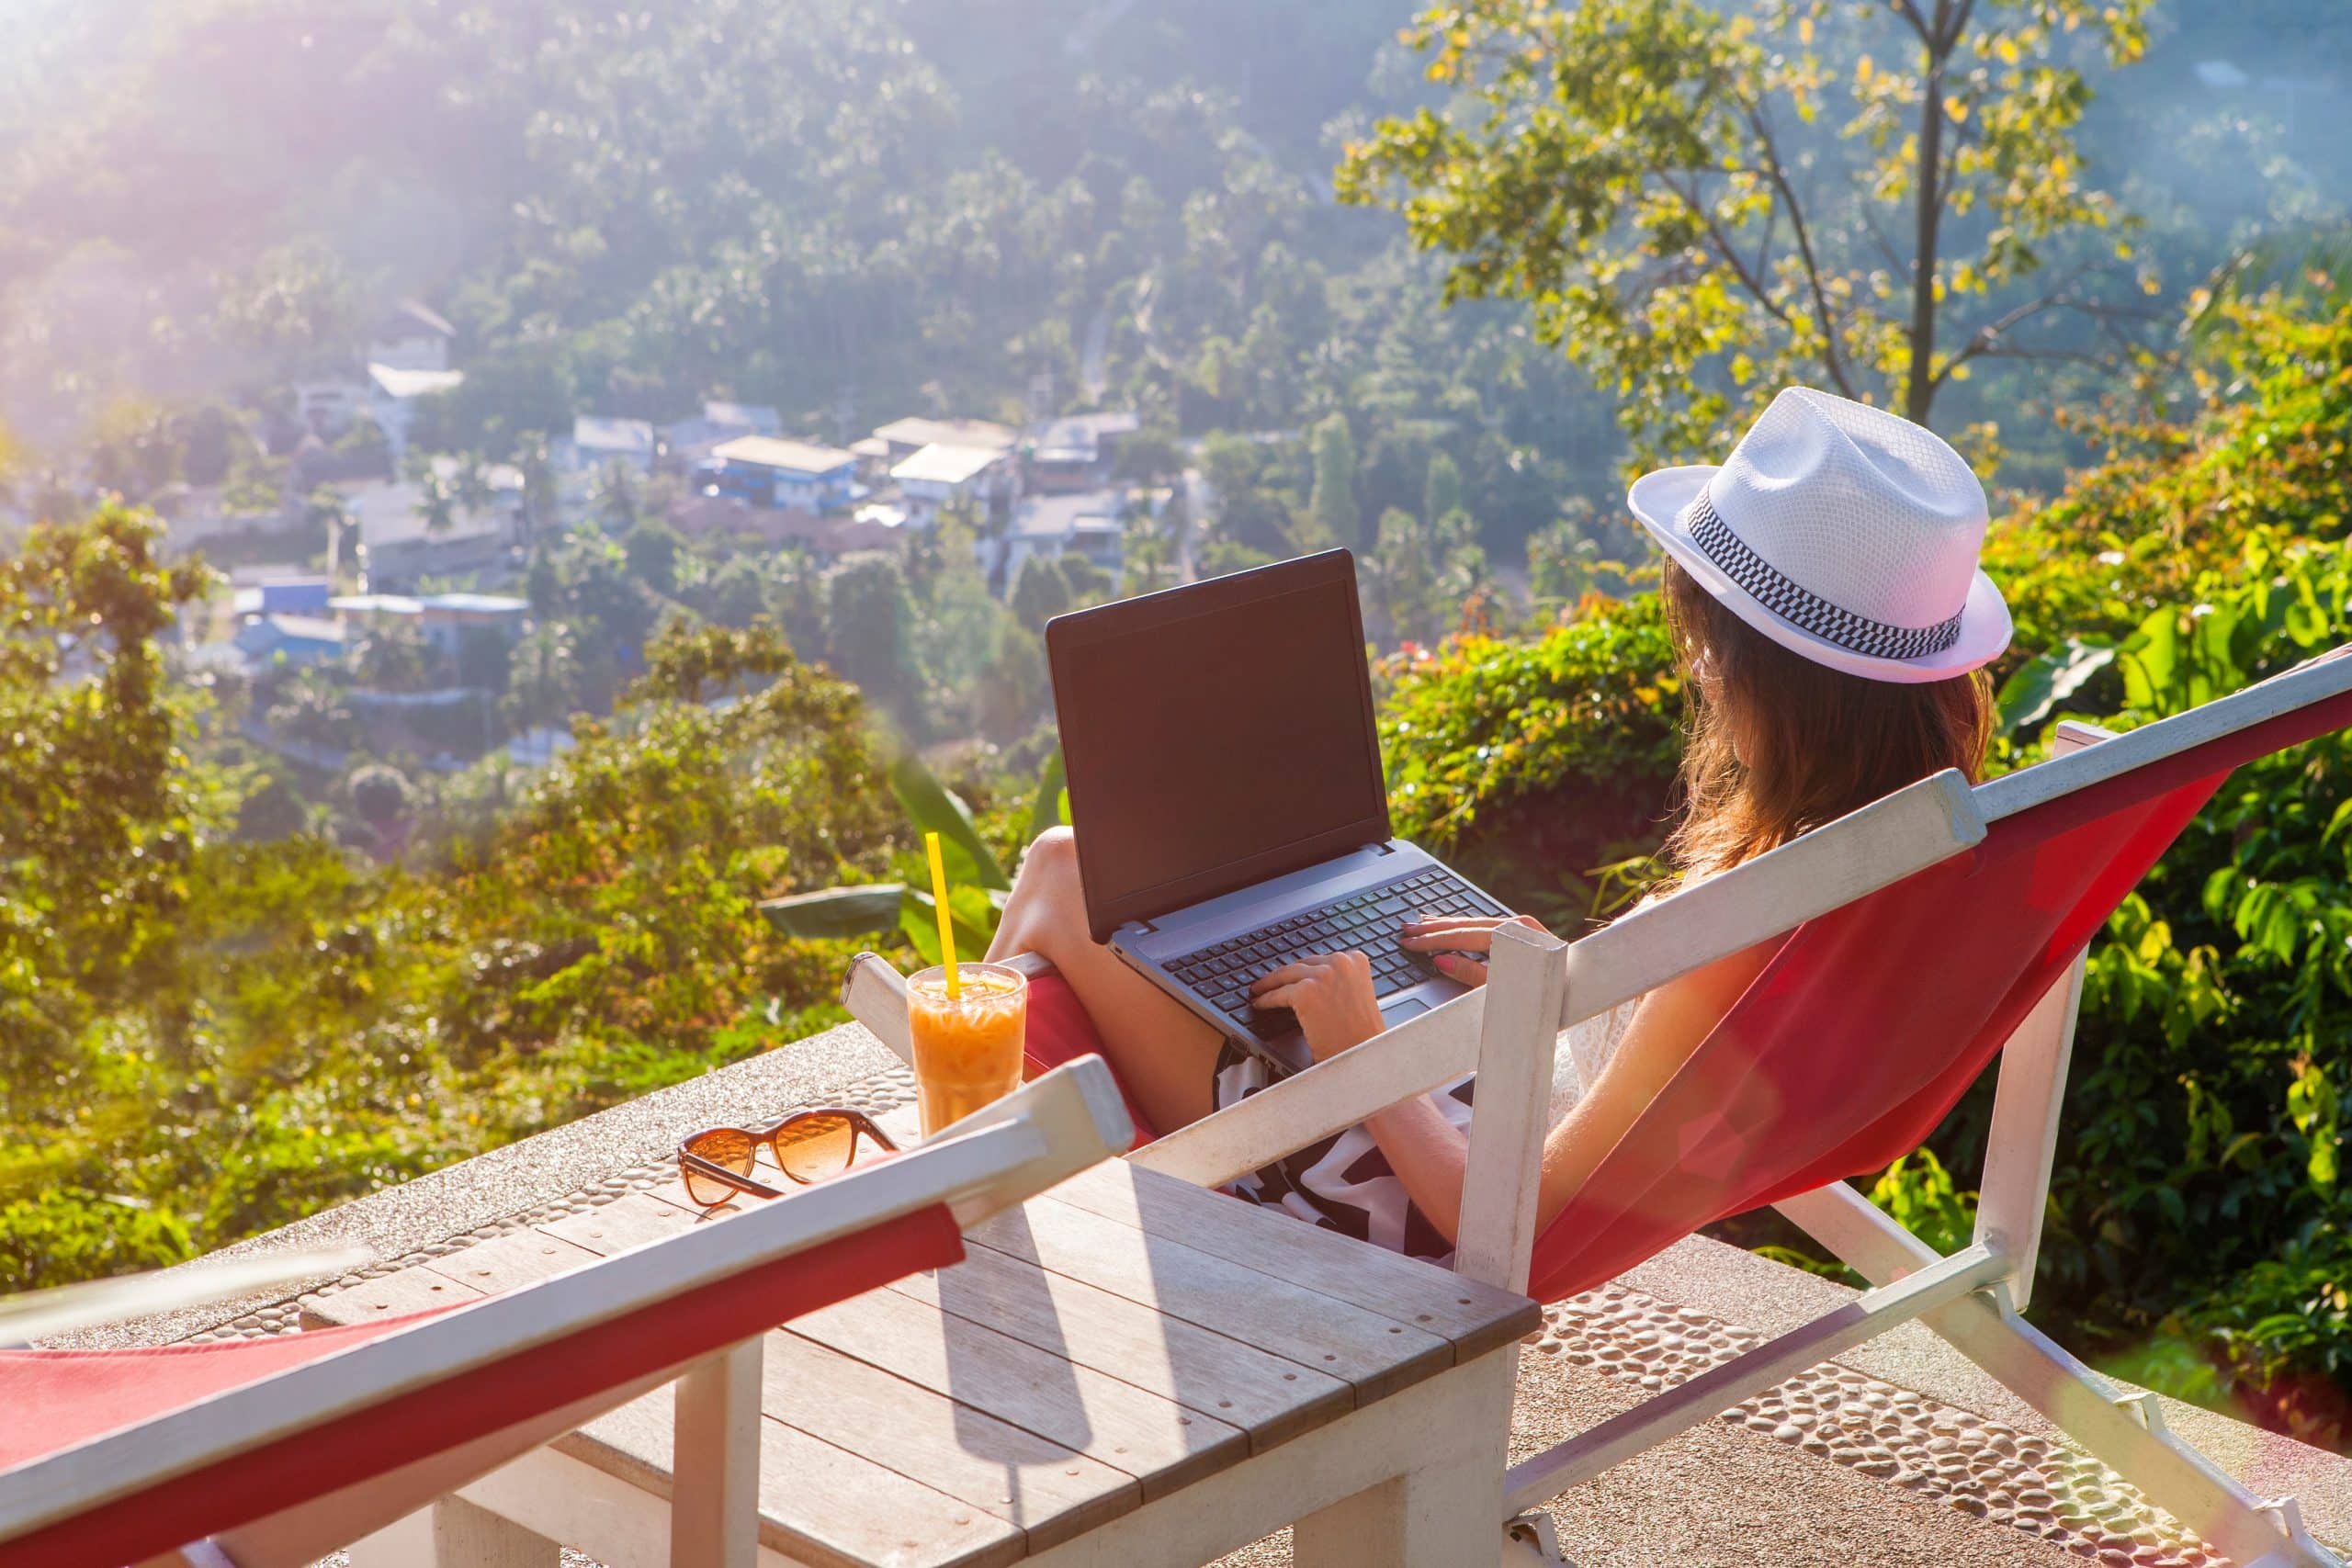 Digital Nomads Are On The Rise - Best Platforms To Find Accommodation